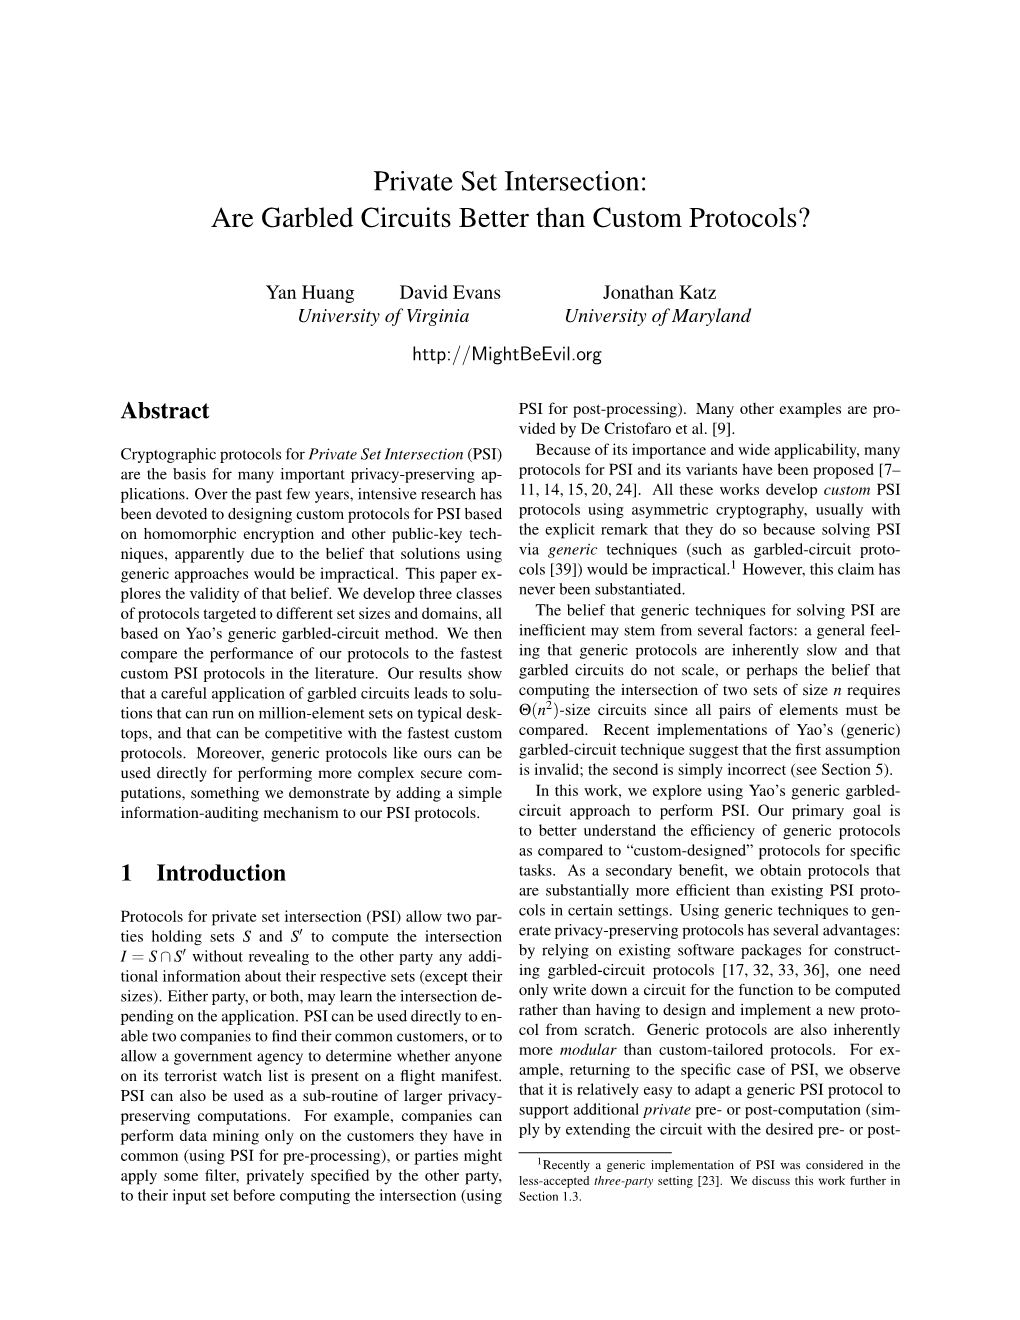 Private Set Intersection: Are Garbled Circuits Better Than Custom Protocols?